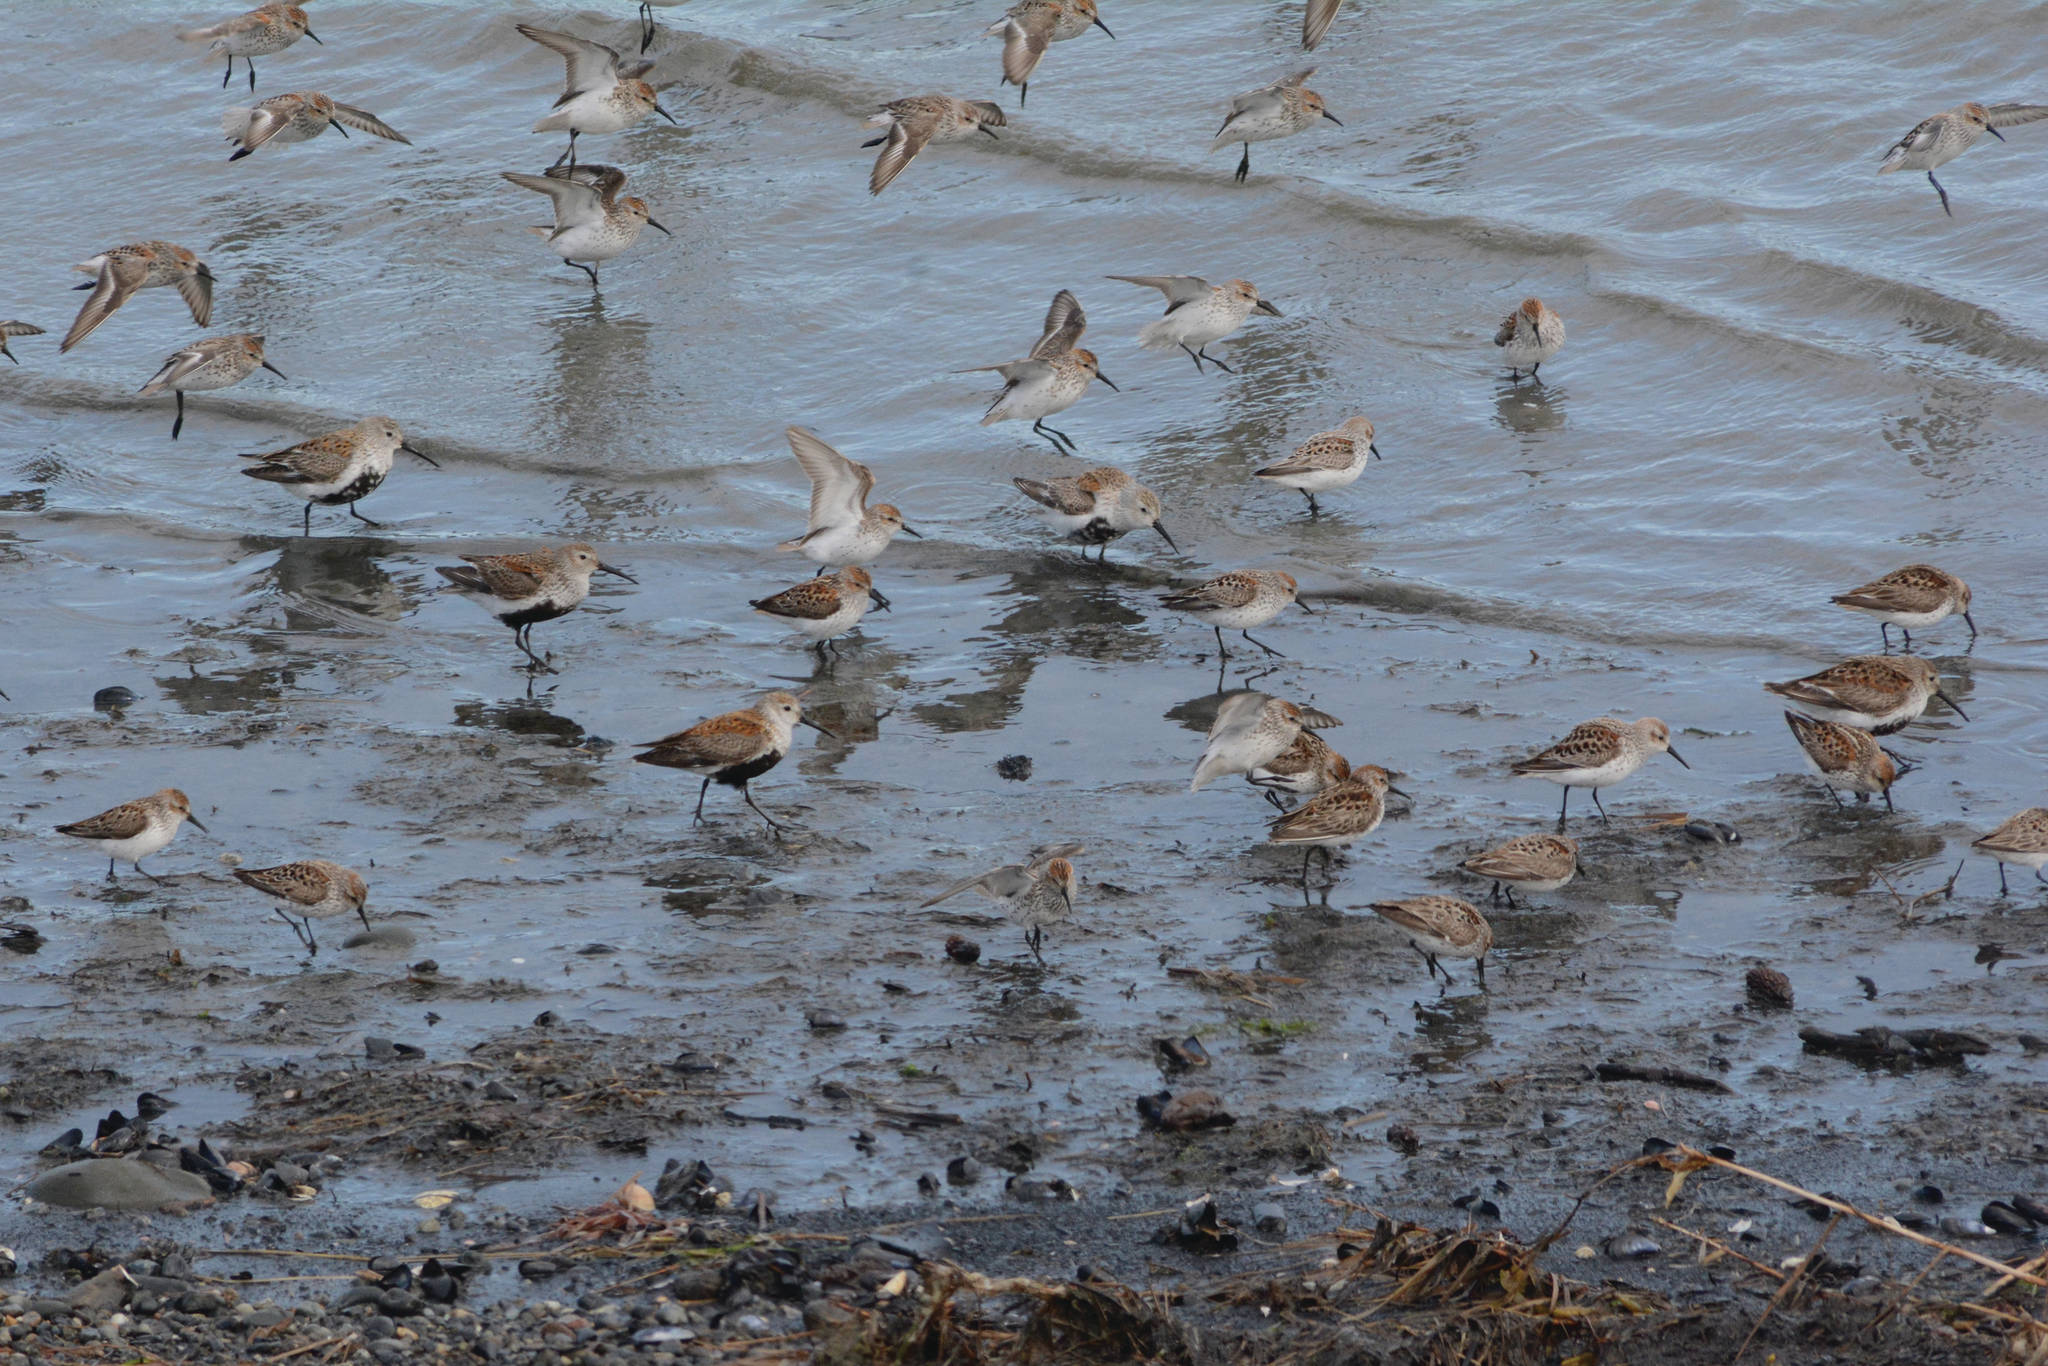 Dunline and western sandpipers feed in Mud Bay on Friday, May 7, 2021, in Homer, Alaska. (Photo by Michael Armstrong/Homer News)